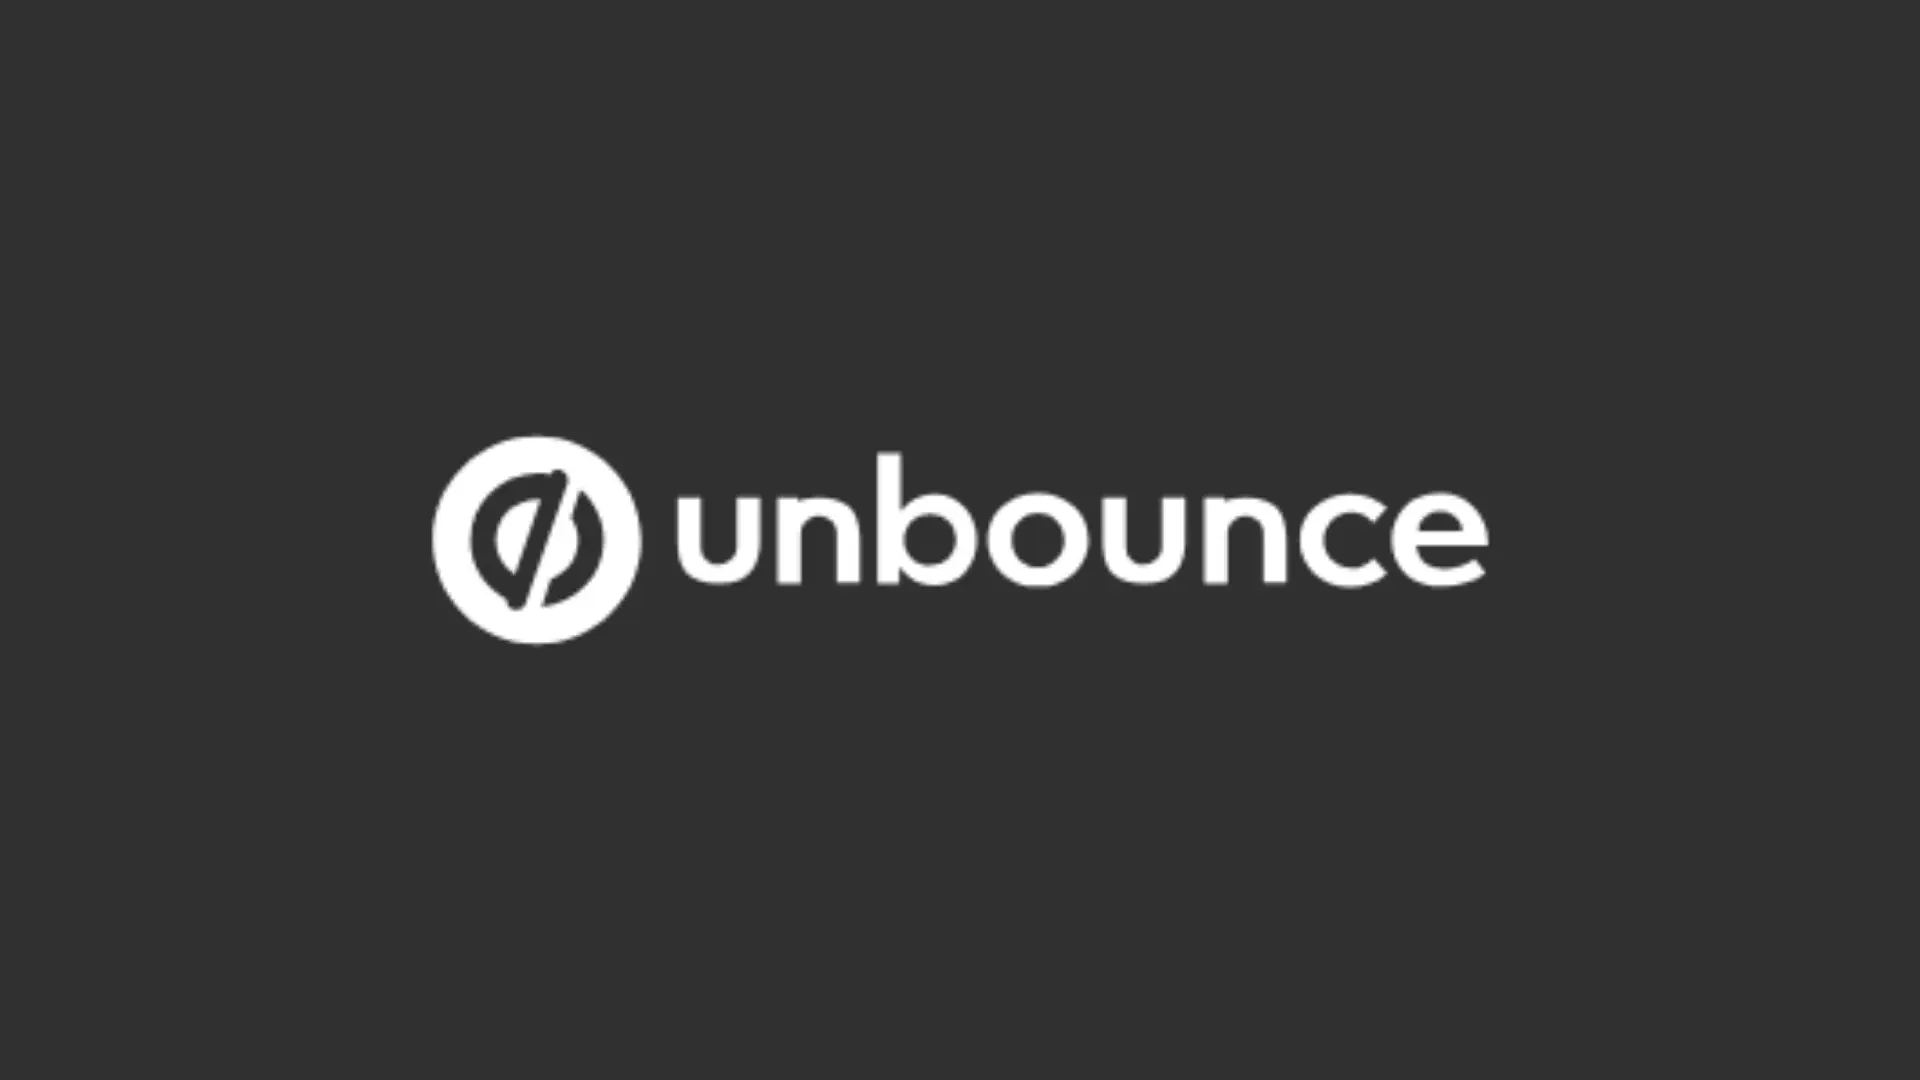 Unbounce brand